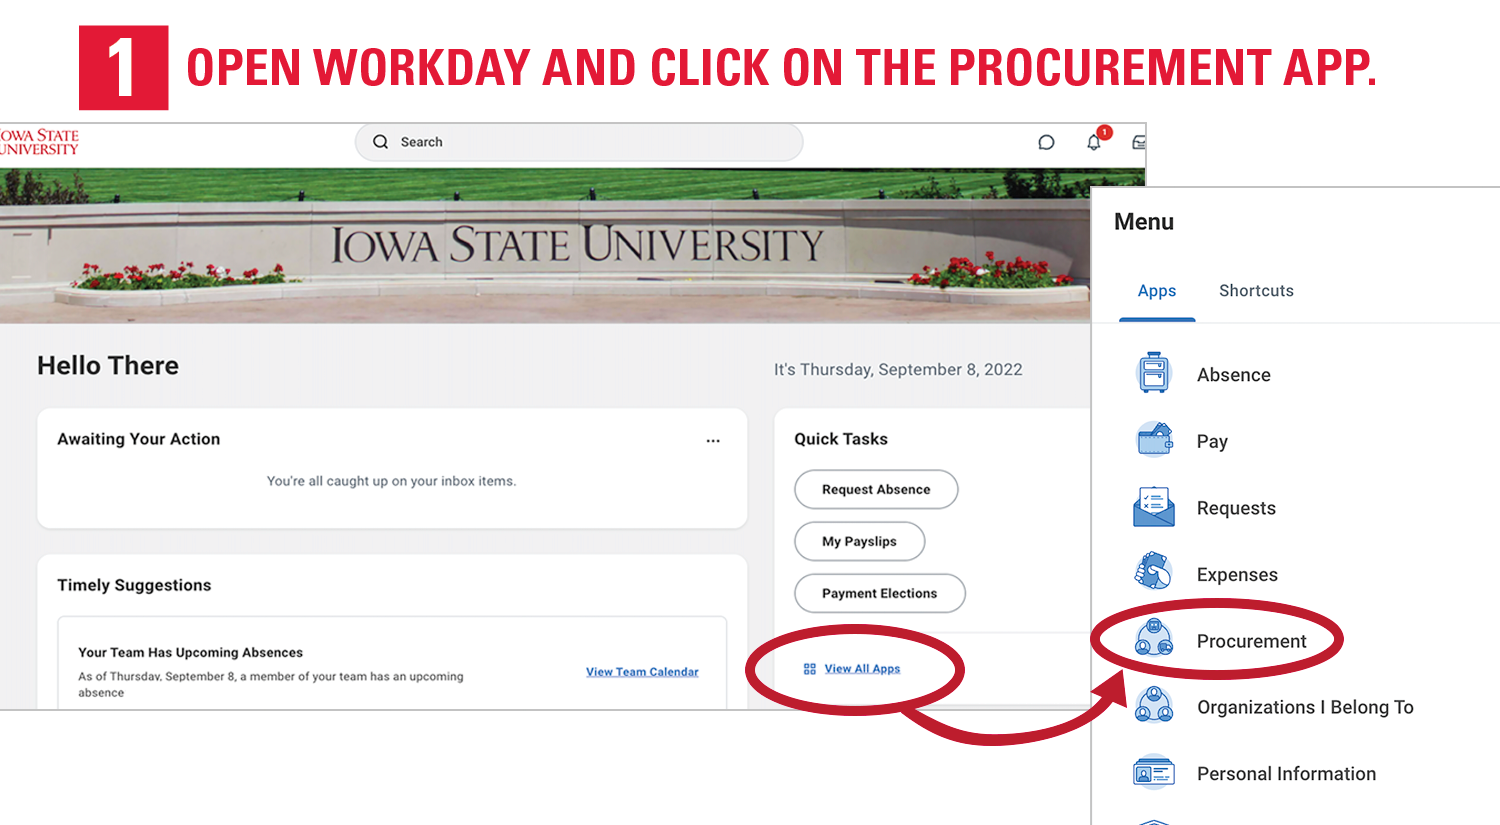 1. Open Workday and click on the Procurement App.